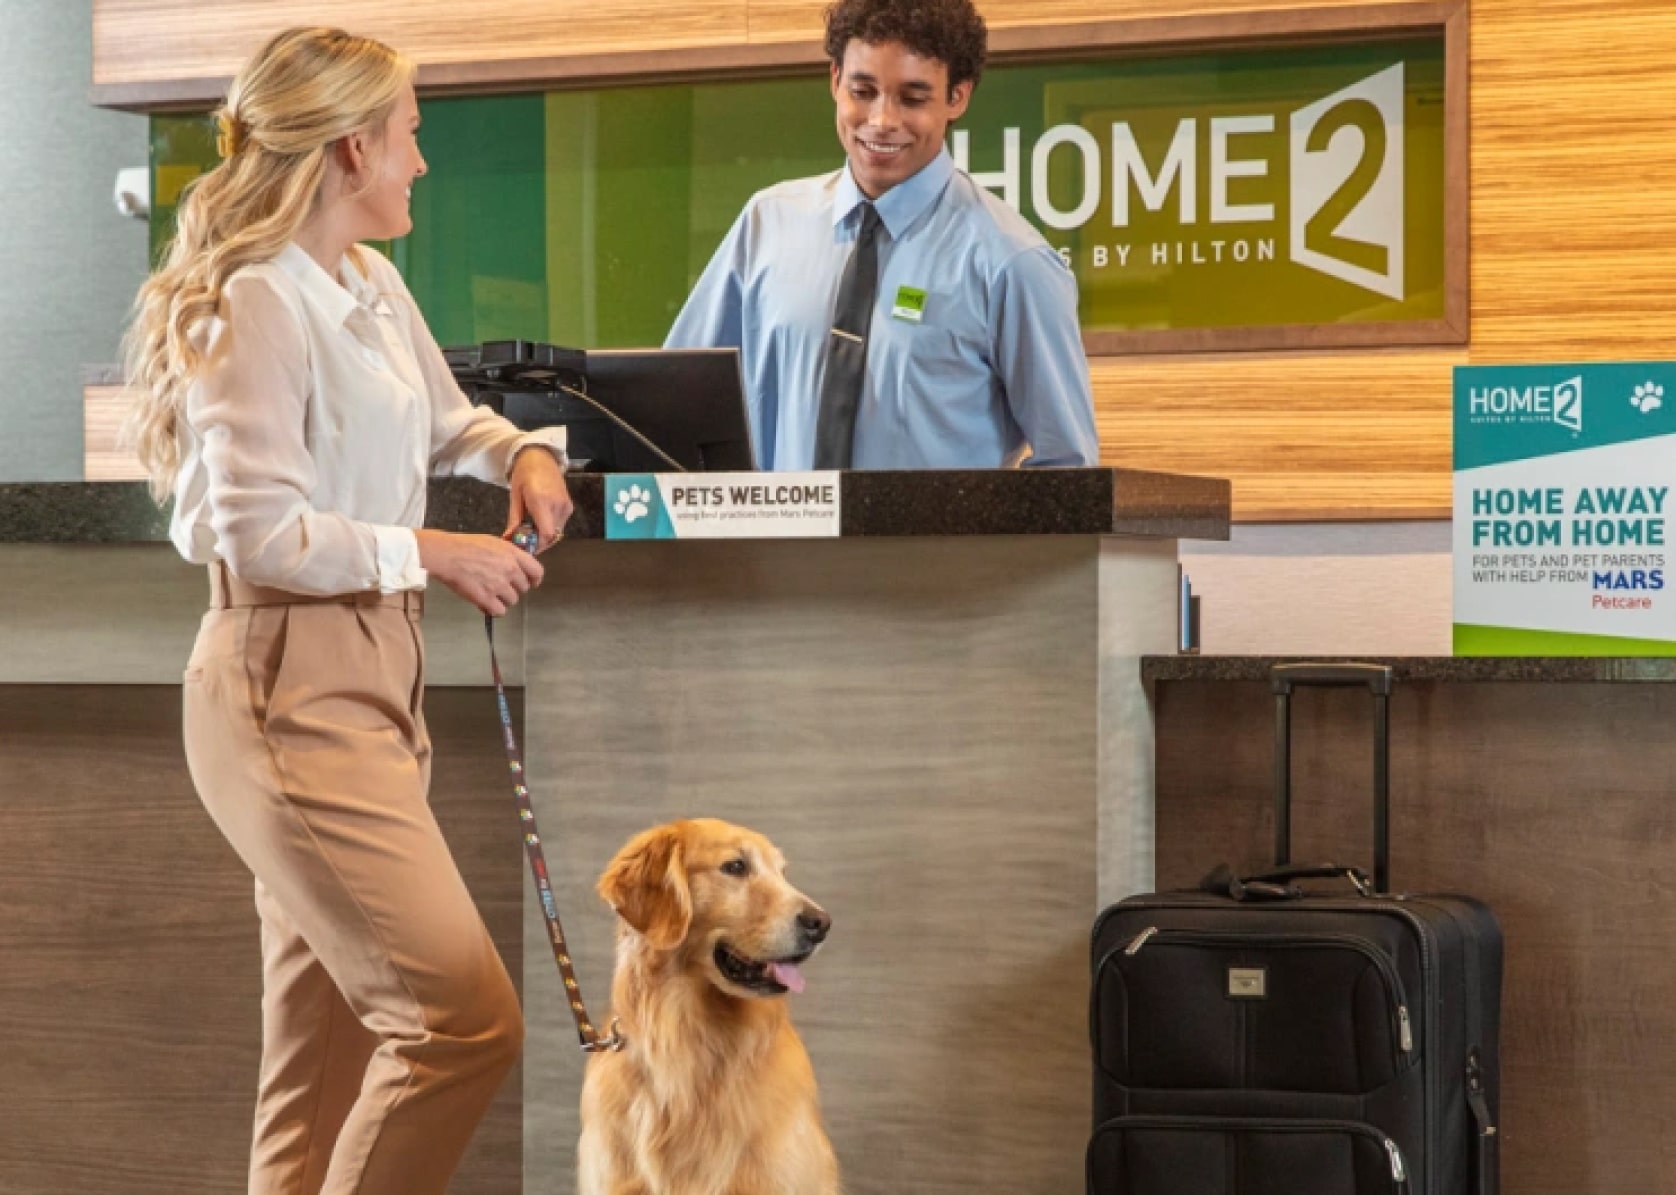 Woman checking in to a Hilton Hotel with a dog.